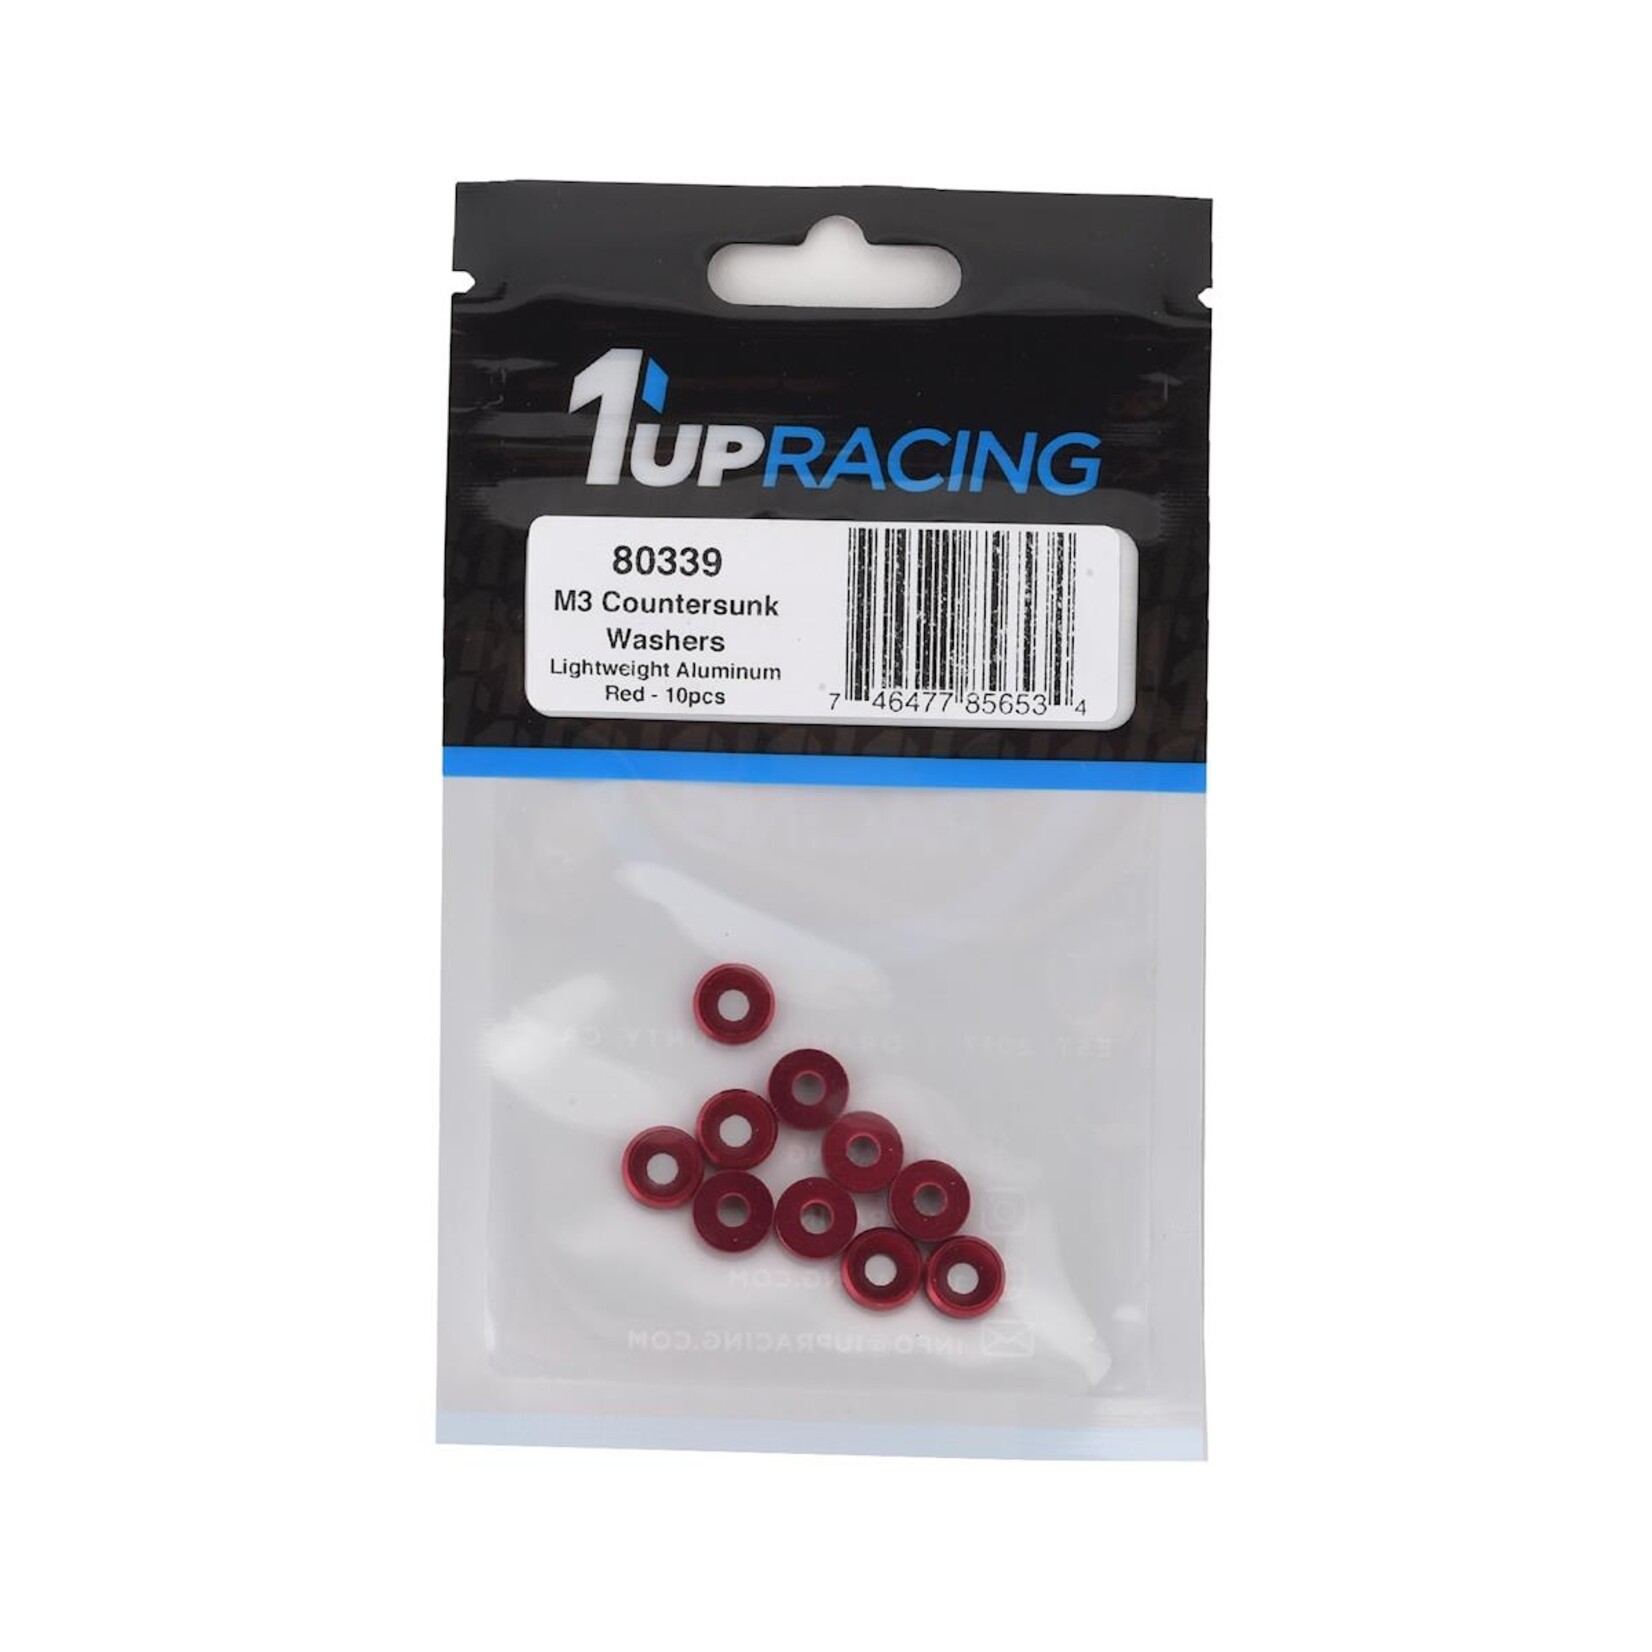 1UP Racing 1UP Racing 3mm Countersunk Washers (Red) (10) #80339